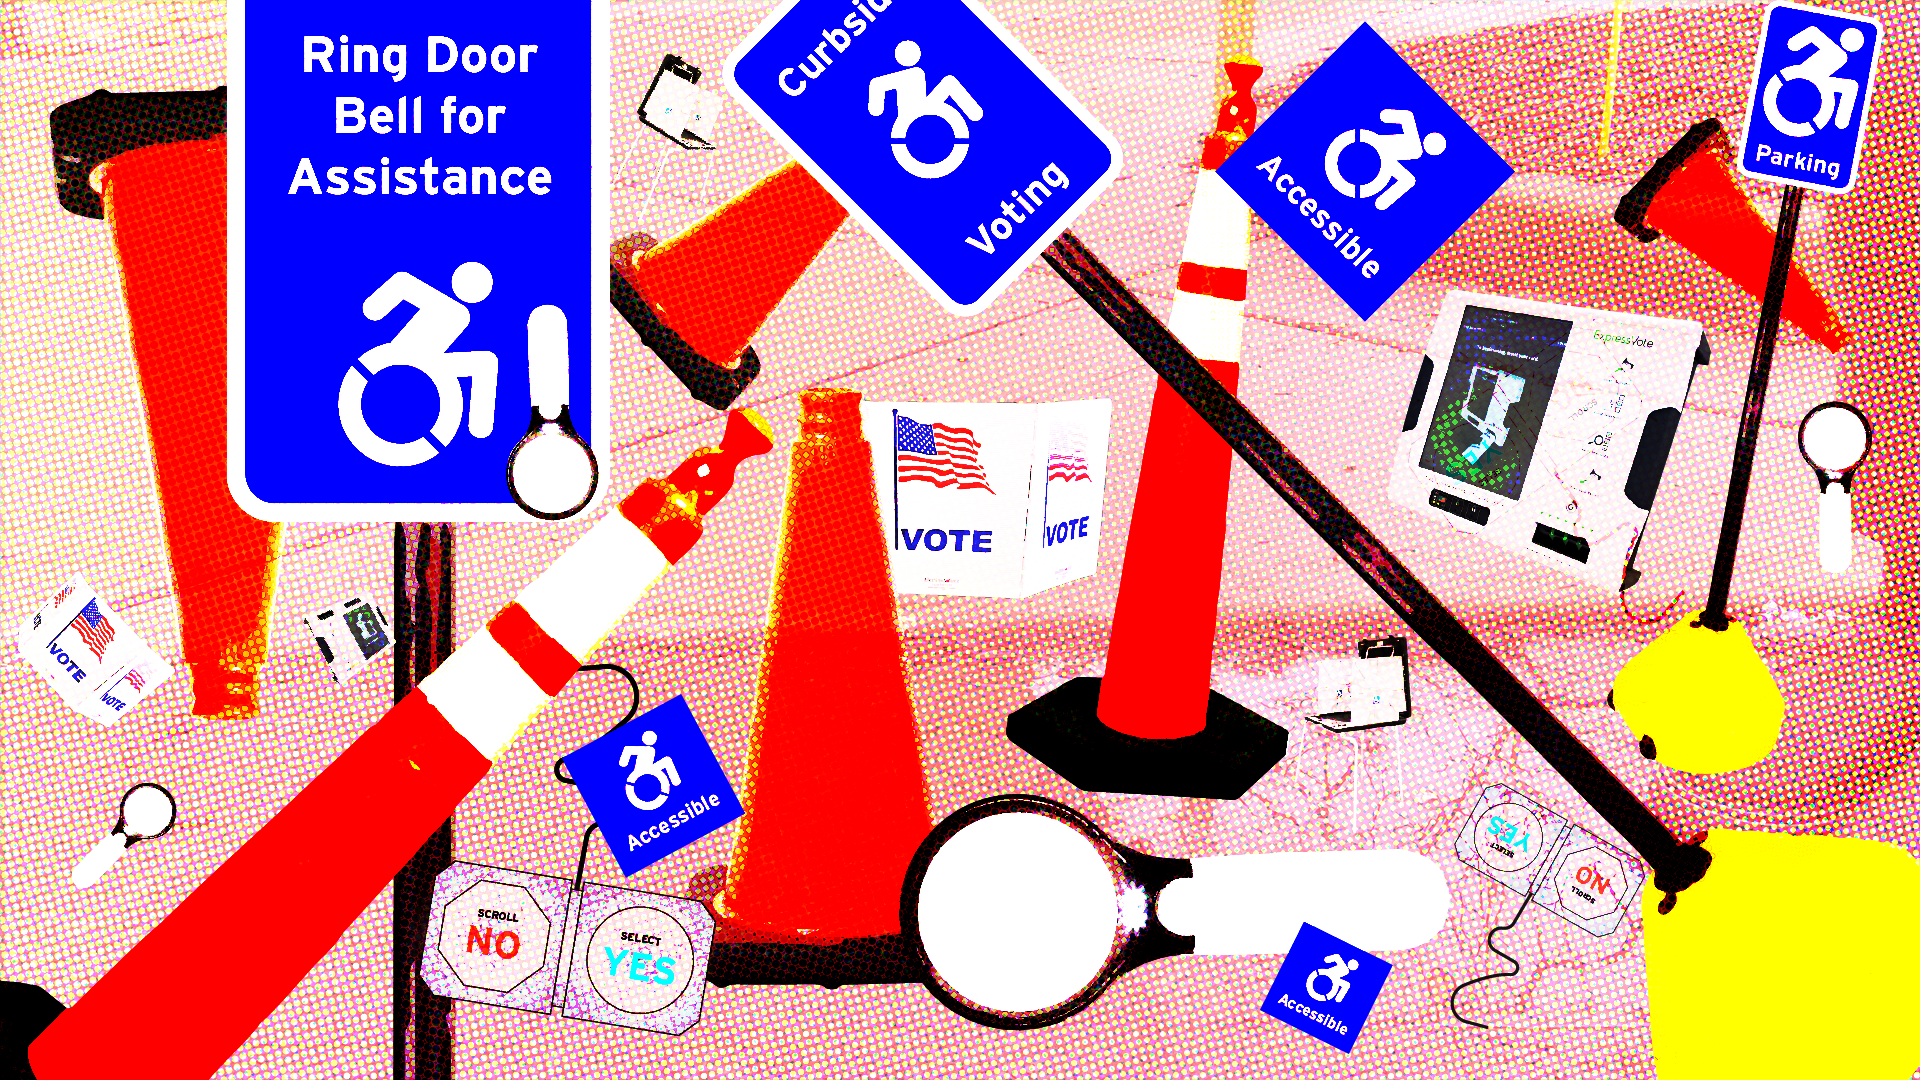 Collage of parking signs, traffic cones, and voting equipment